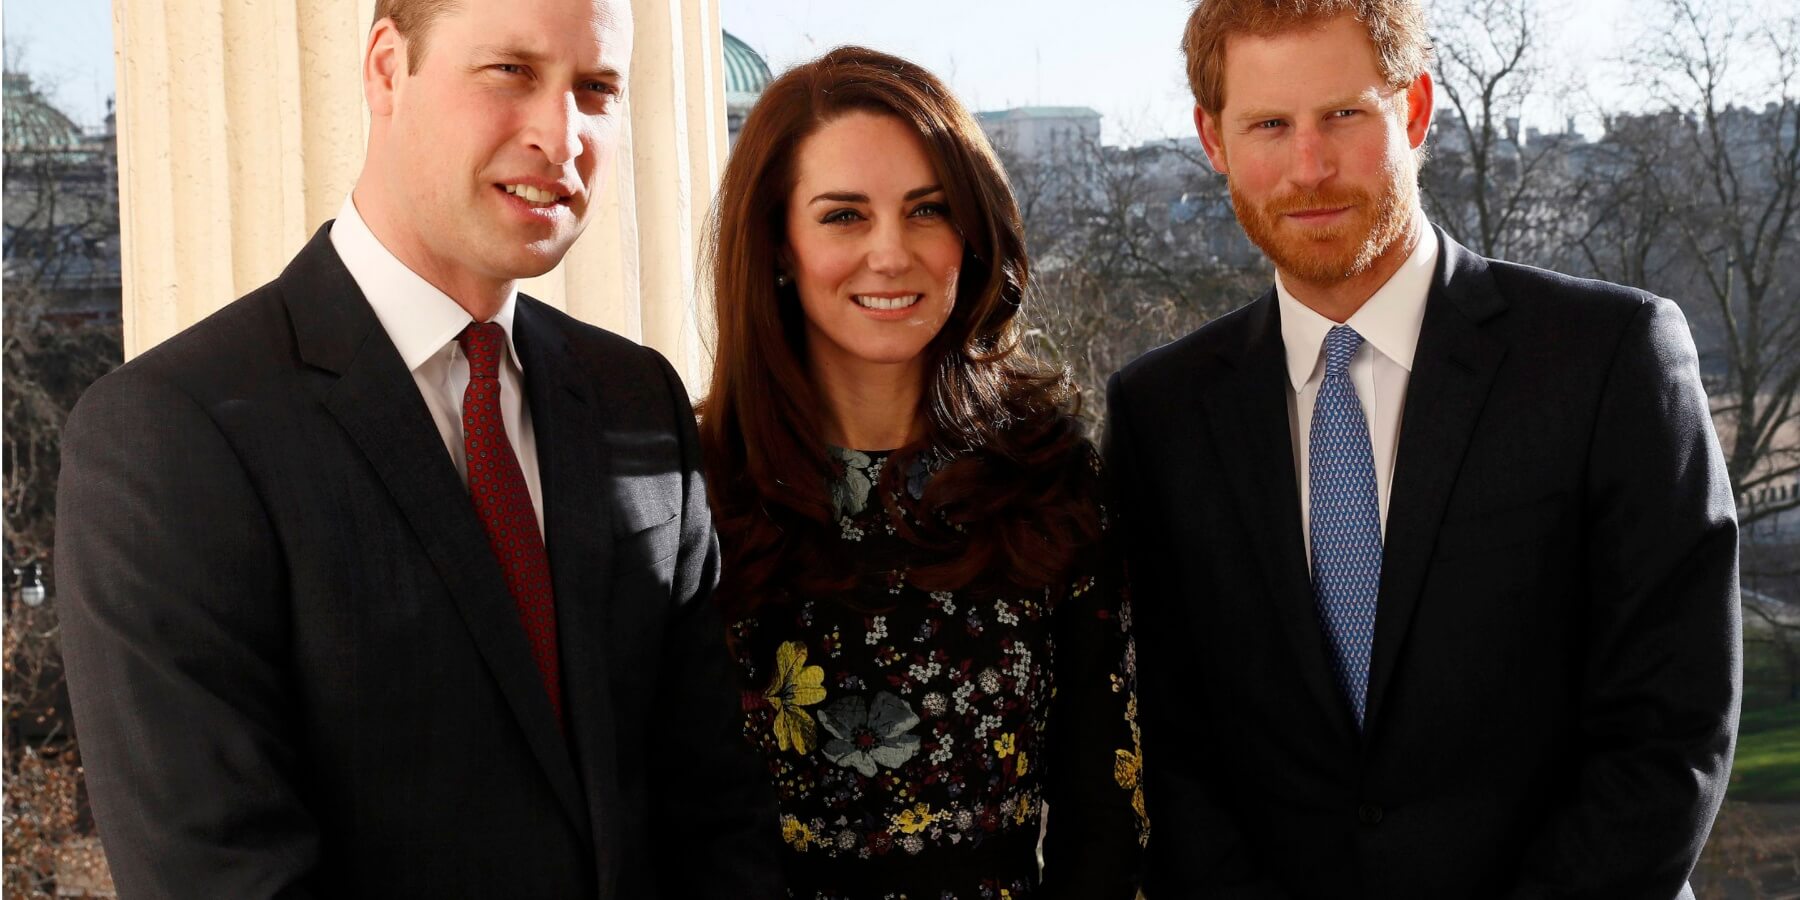 Prince William, Kate Middleton and Prince Harry photographed together in 2017